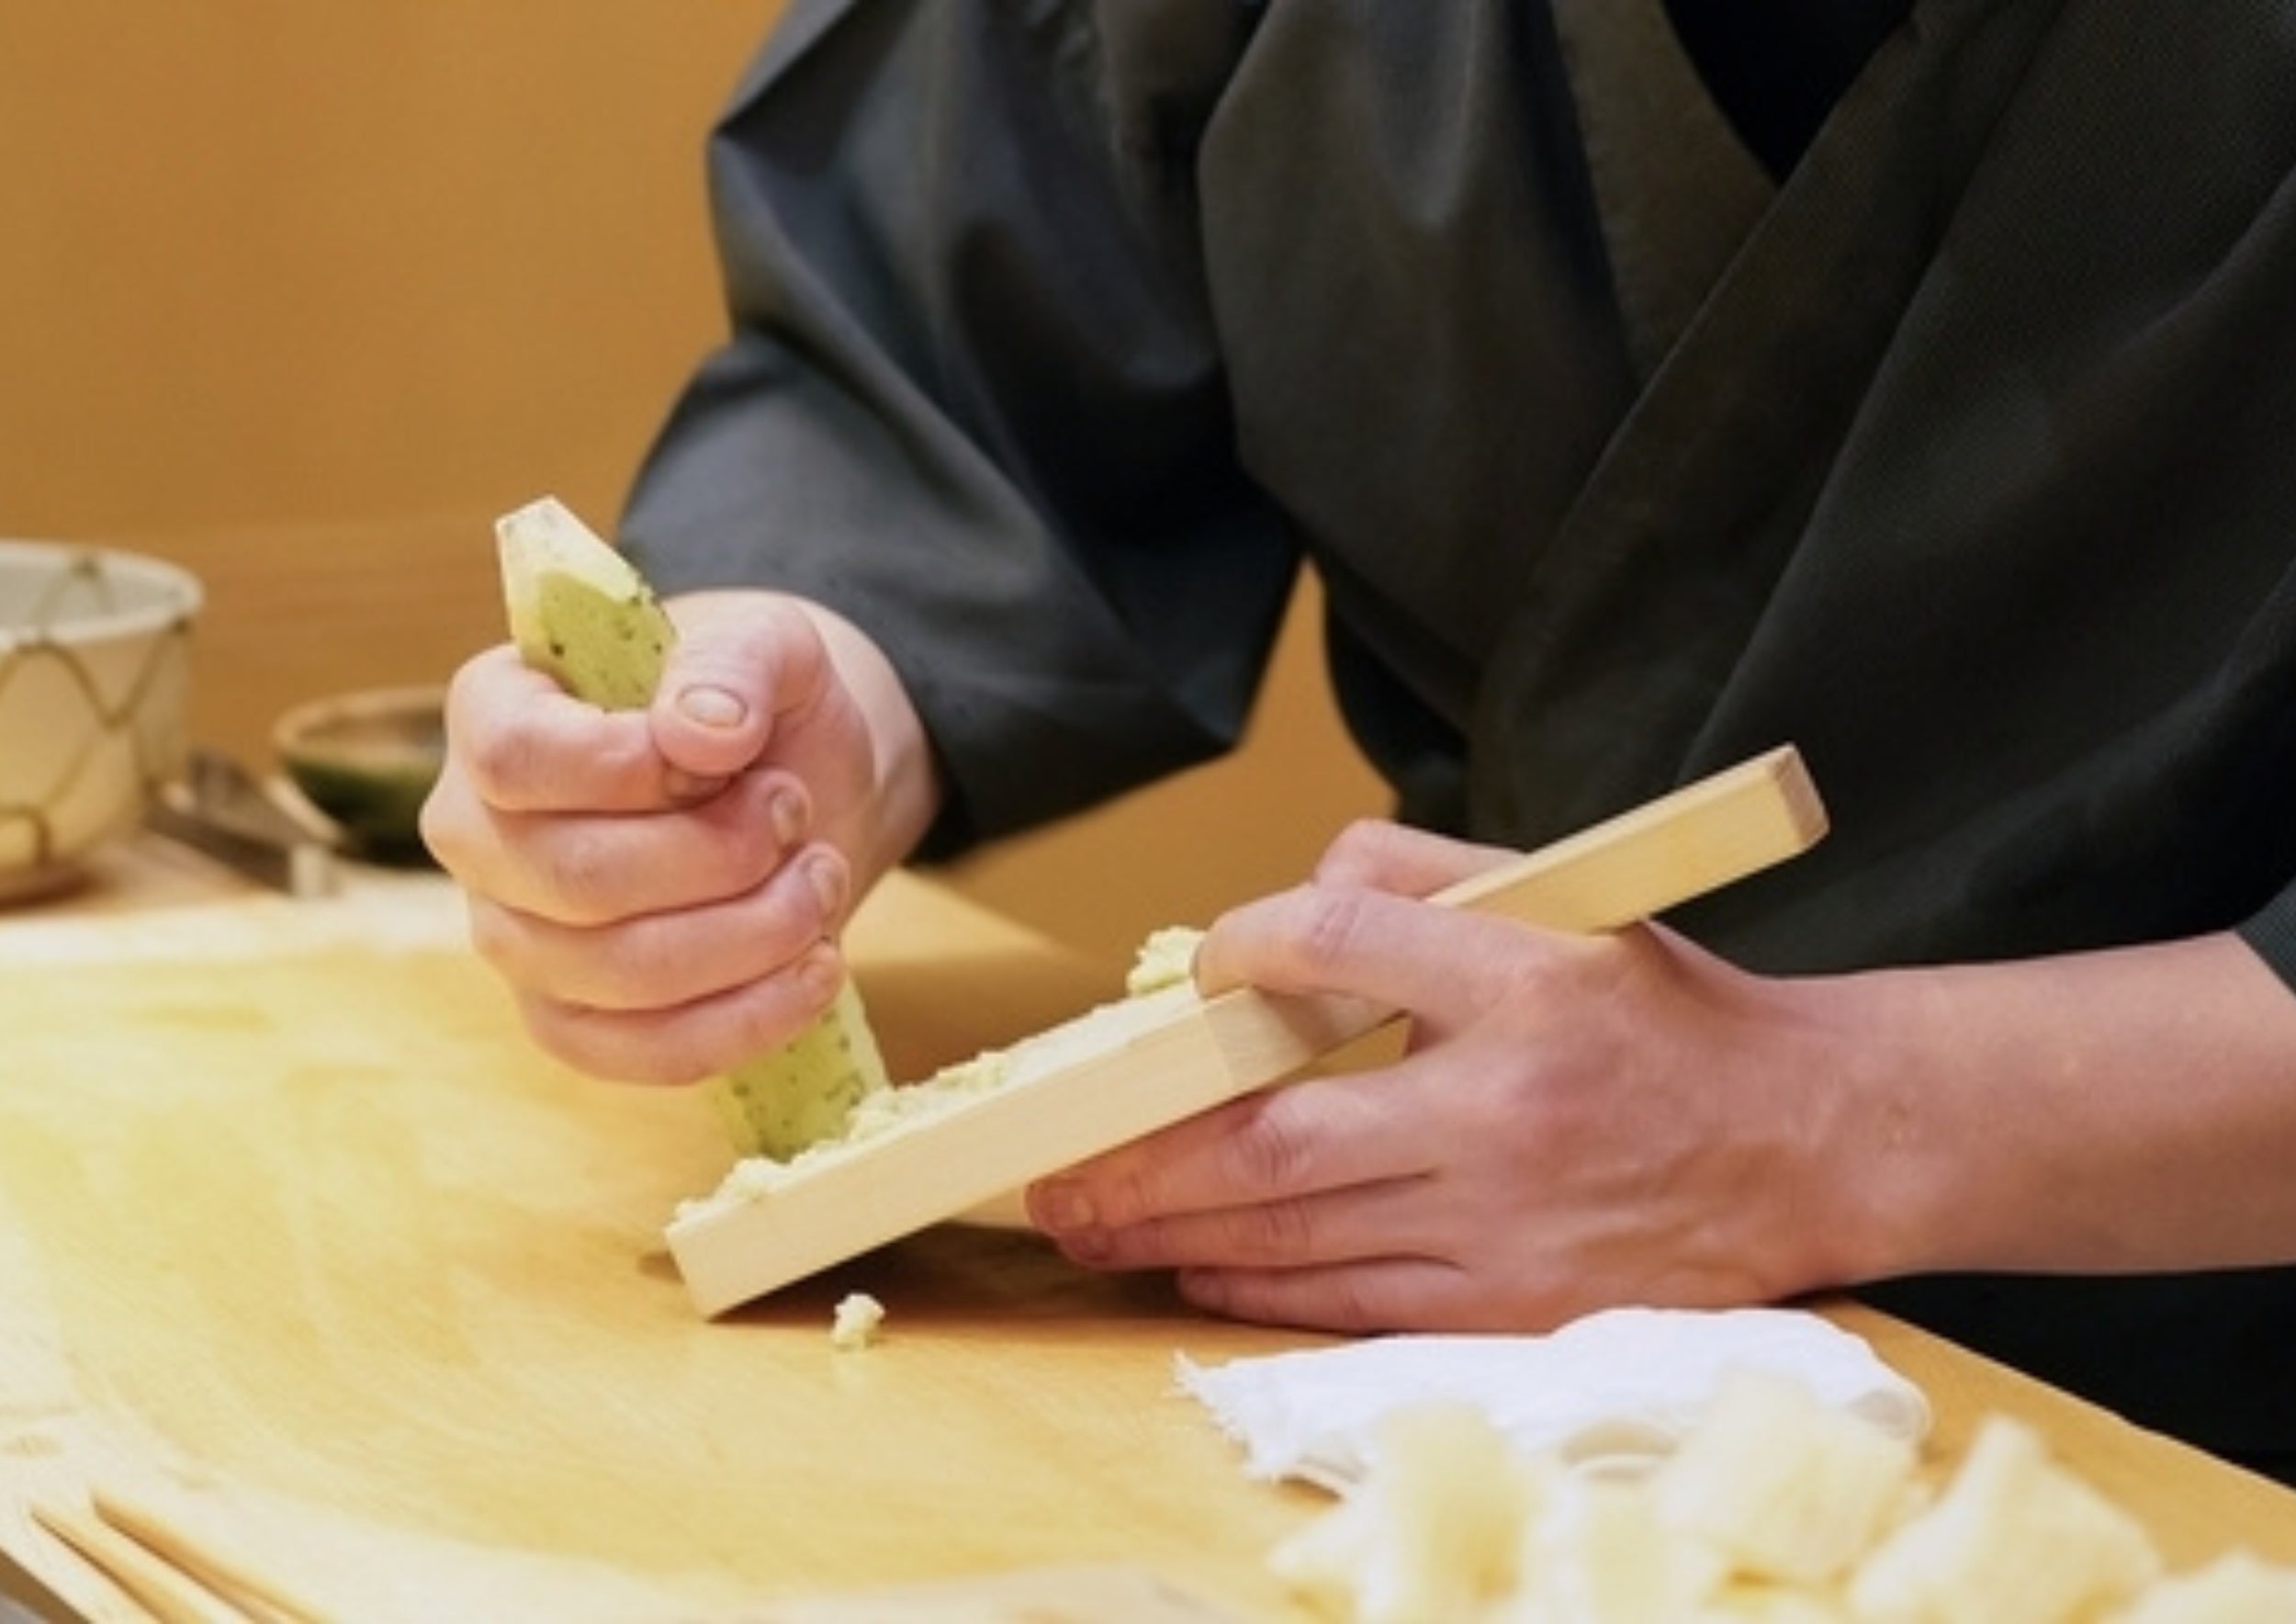 Chef grinding fresh wasabi on a wooden grater